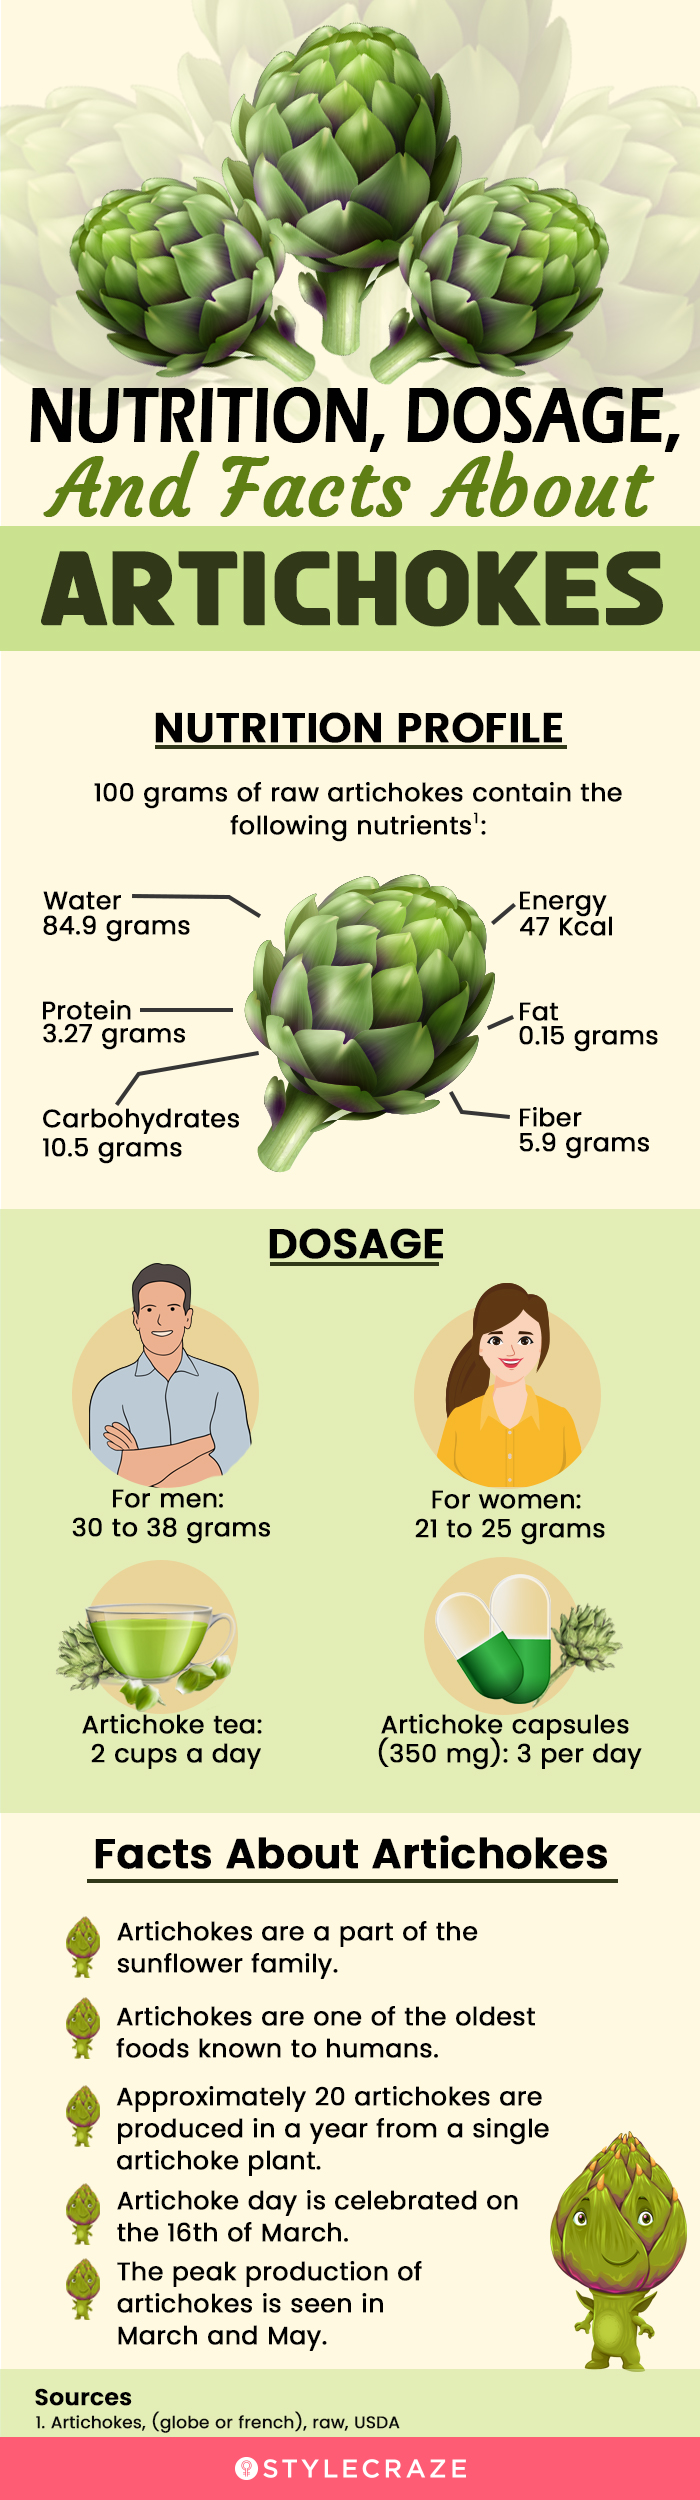 nutrition, dosage, and facts about artichokes (infographic)